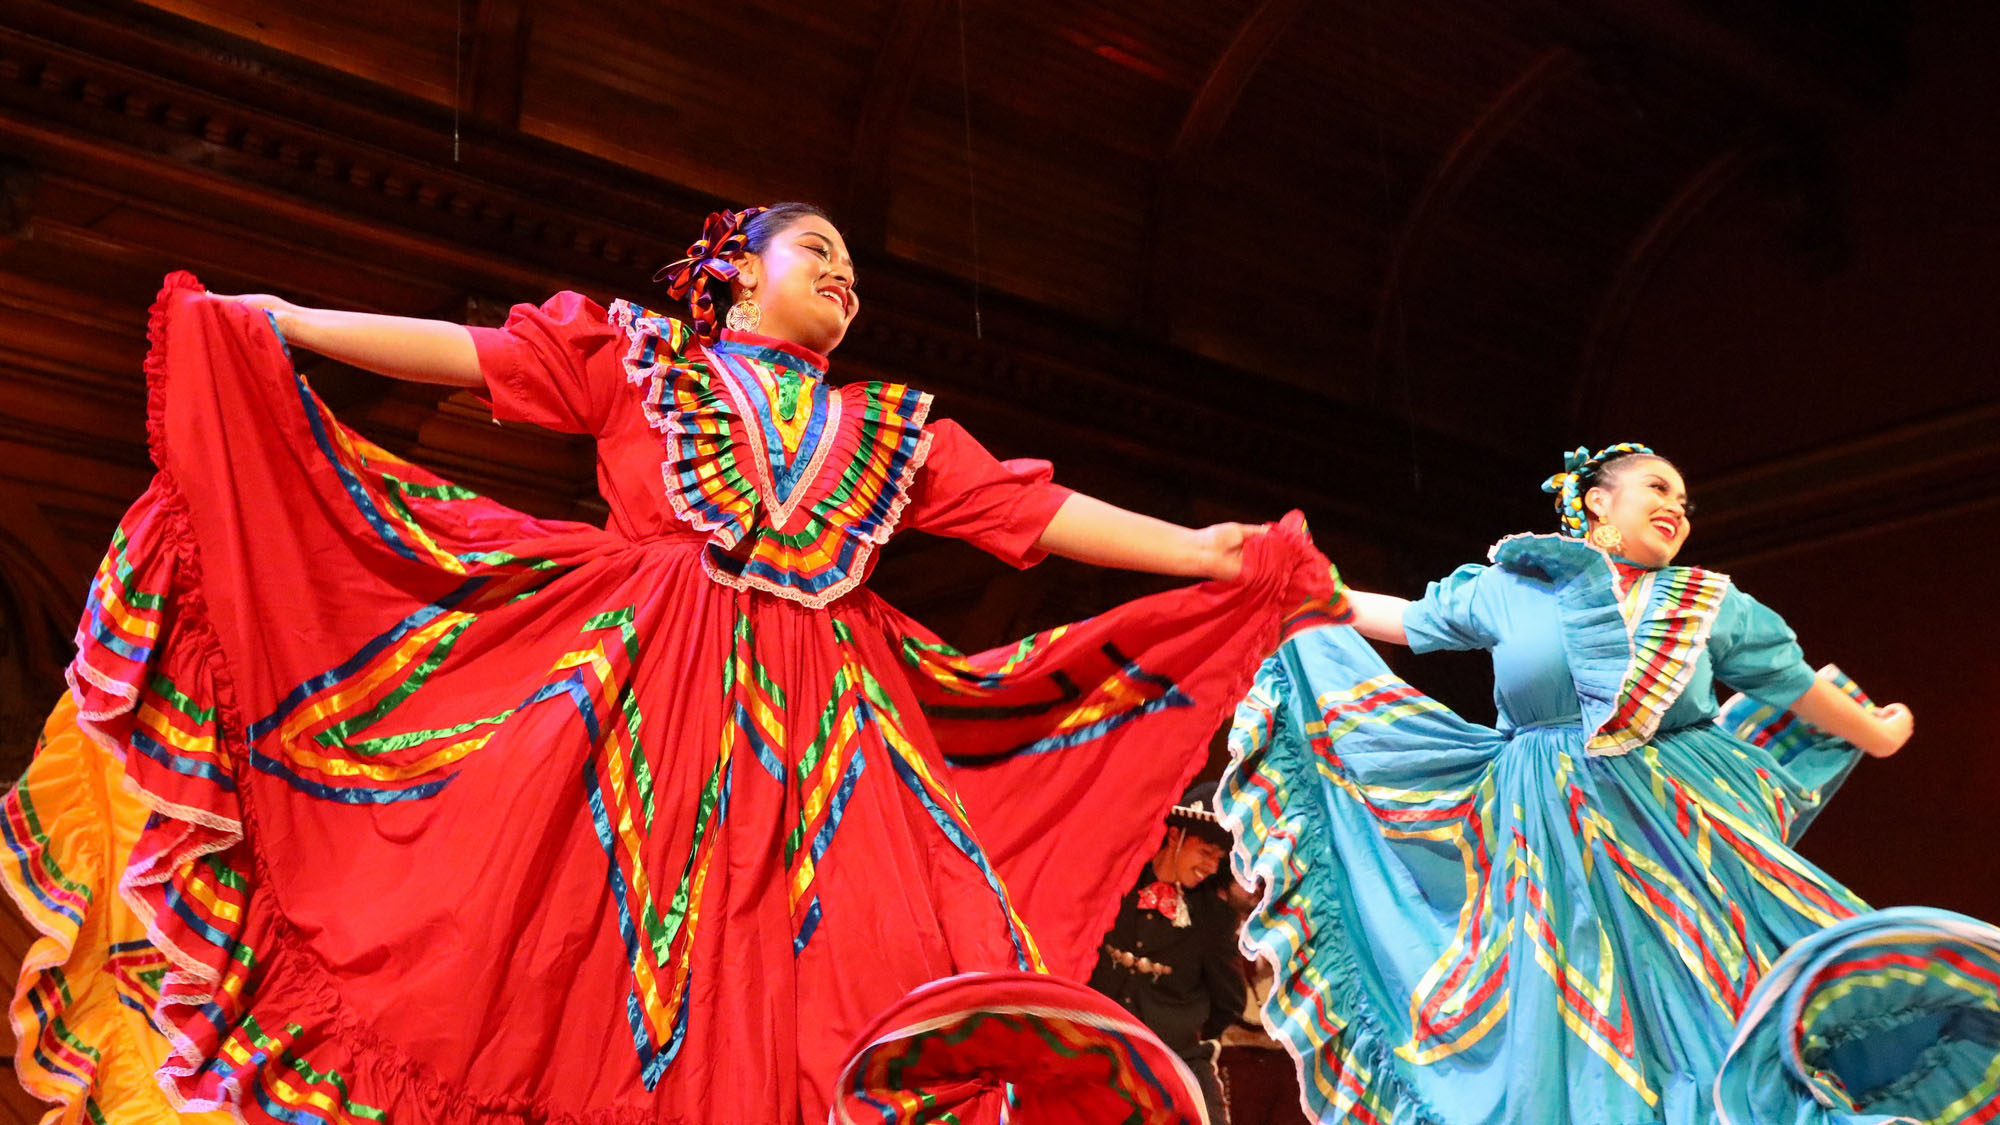 The Harvard Foundation for Intercultural and Race Relations held its 38th annual Cultural Rhythms Showcase, featuring performances from 10 student cultural groups. Dancers in RAZA Ballet Folklorico join Mariachi Veritas musicians in highlighting Mexico’s culture through vibrant music and captivating dance.